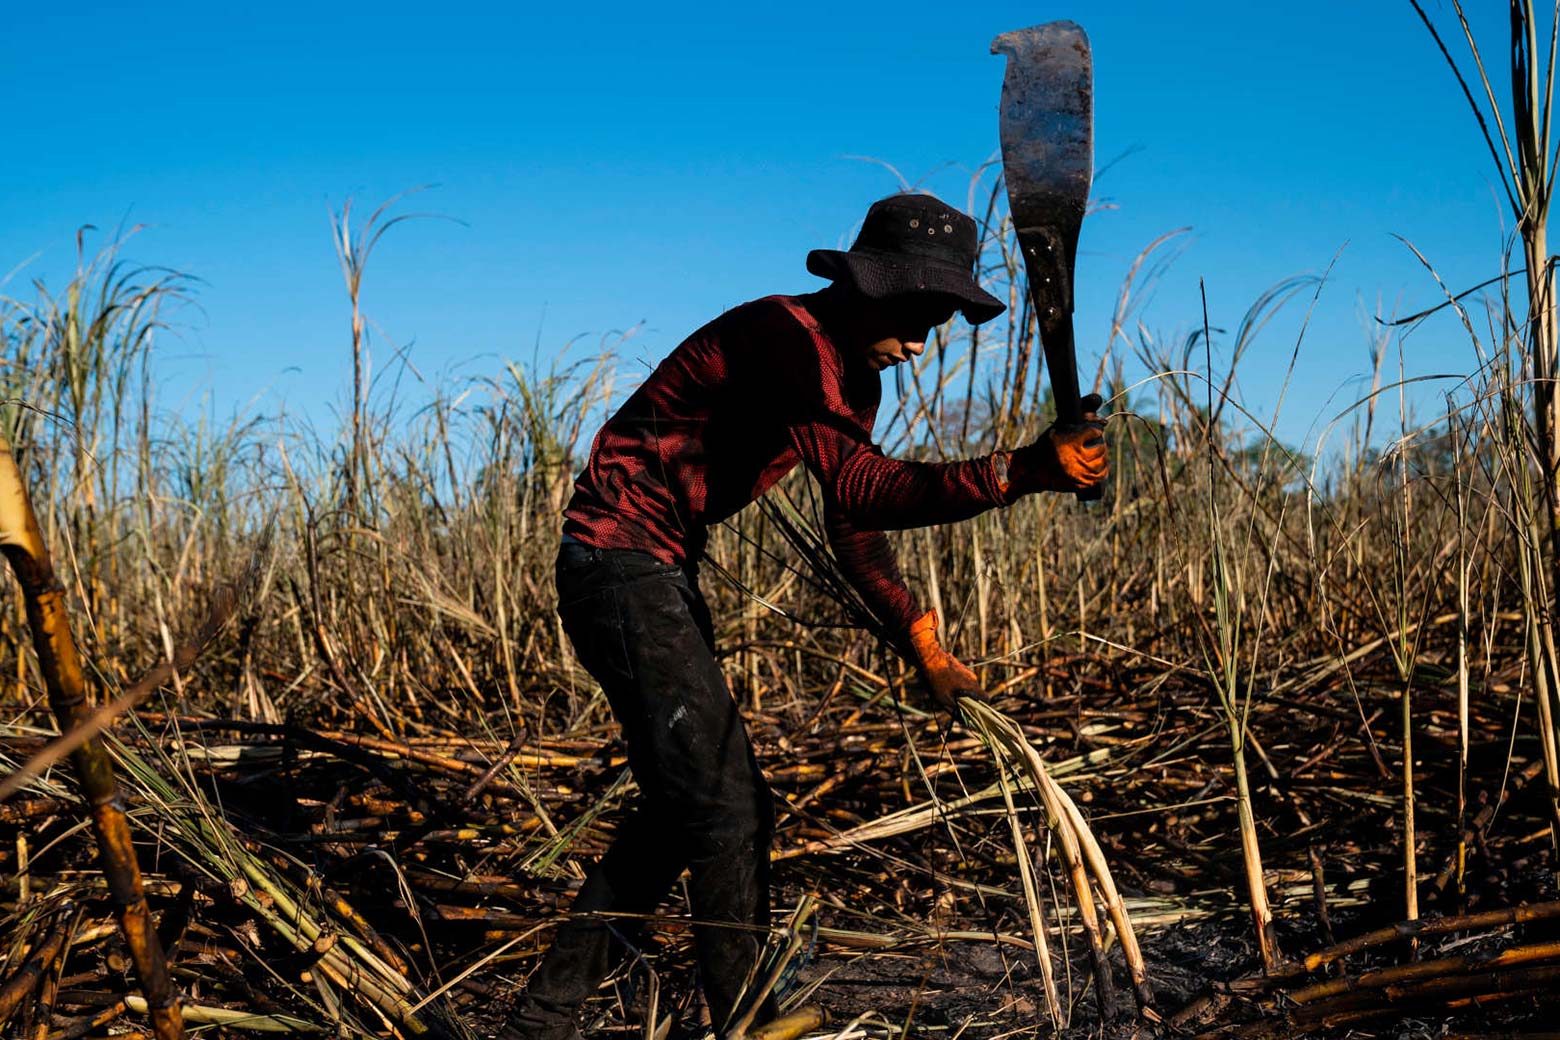 A worker uses a large, machete-like tool to cut through a field of sugar cane. In the background, the sky is blue. 